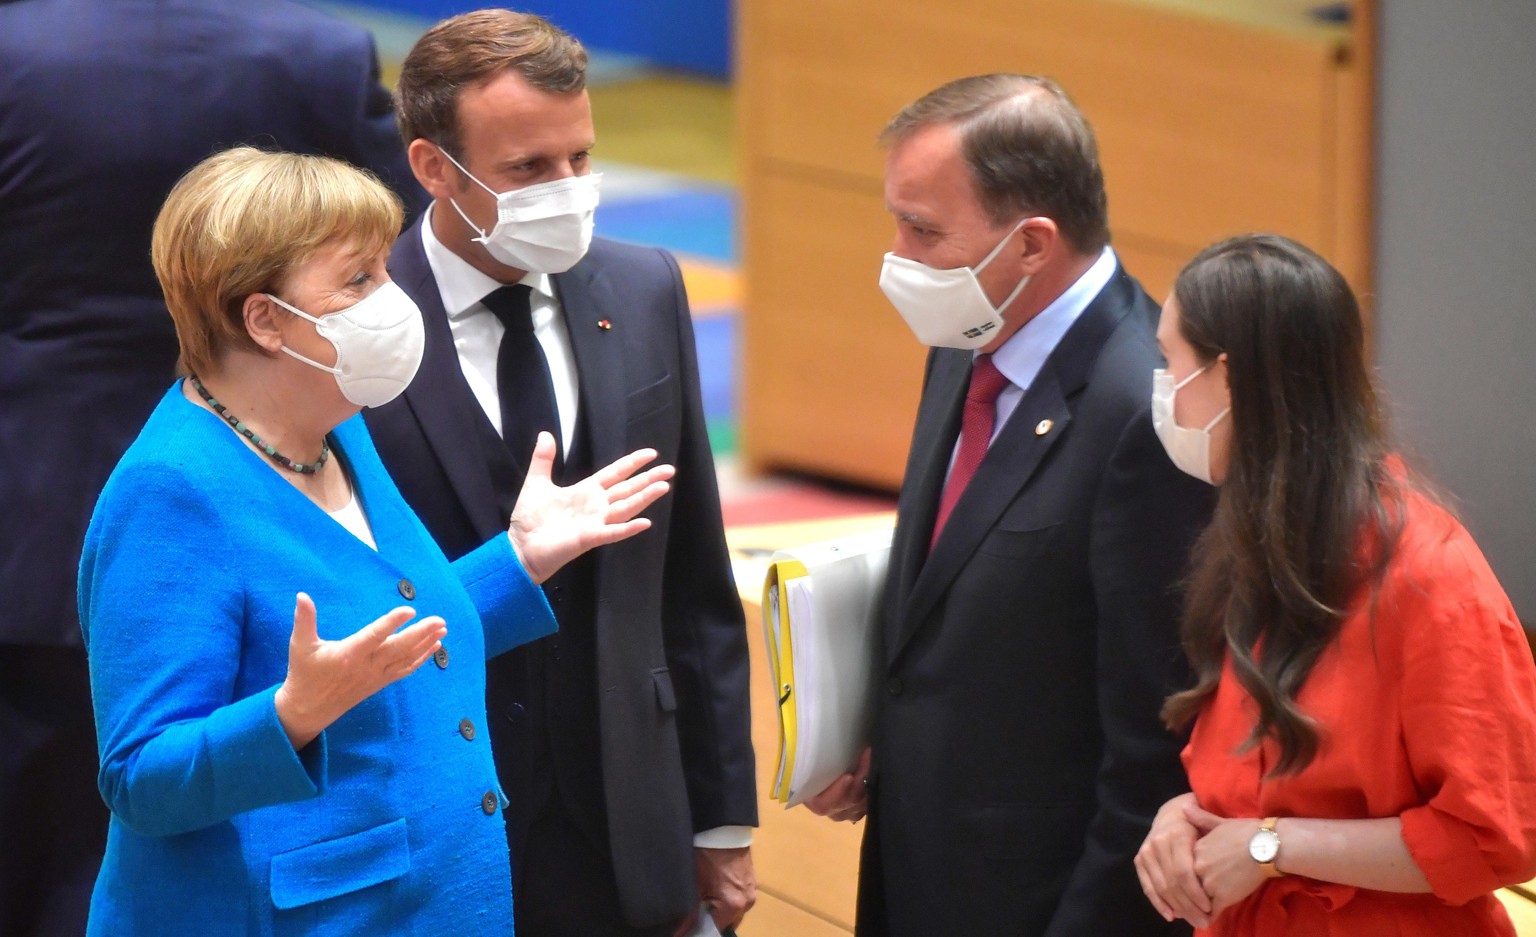 German Chancellor Angela Merkel, left, and French President Emmanuel Macron, second left, speak with Sweden's Prime Minister Stefan Lofven, second right, and Finland's Prime Minister Sanna Marin, righ ...